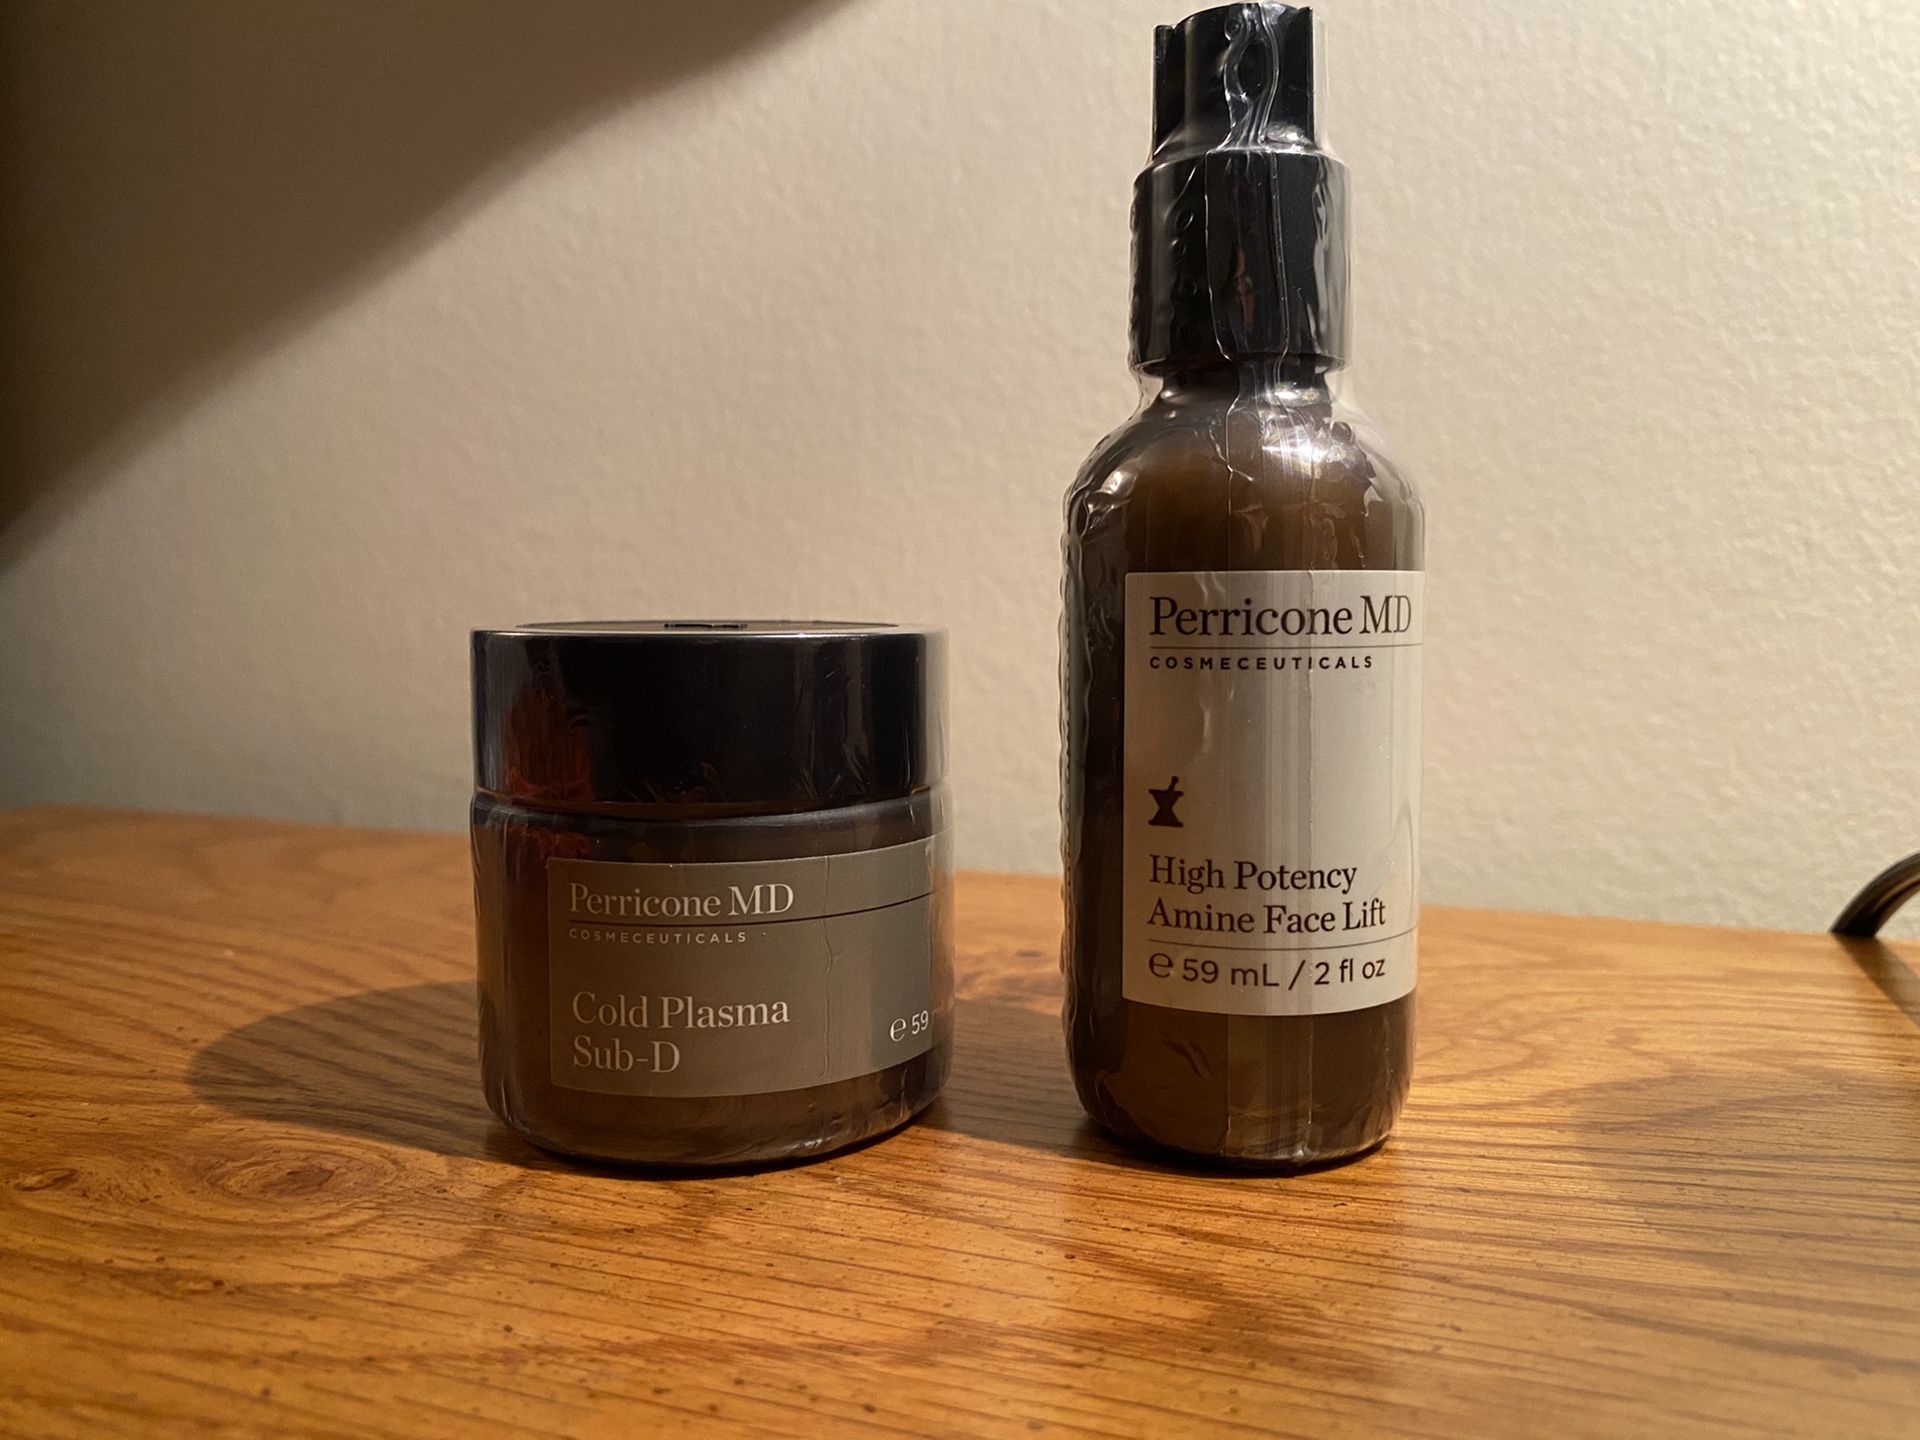 Perricone MD Skincare products